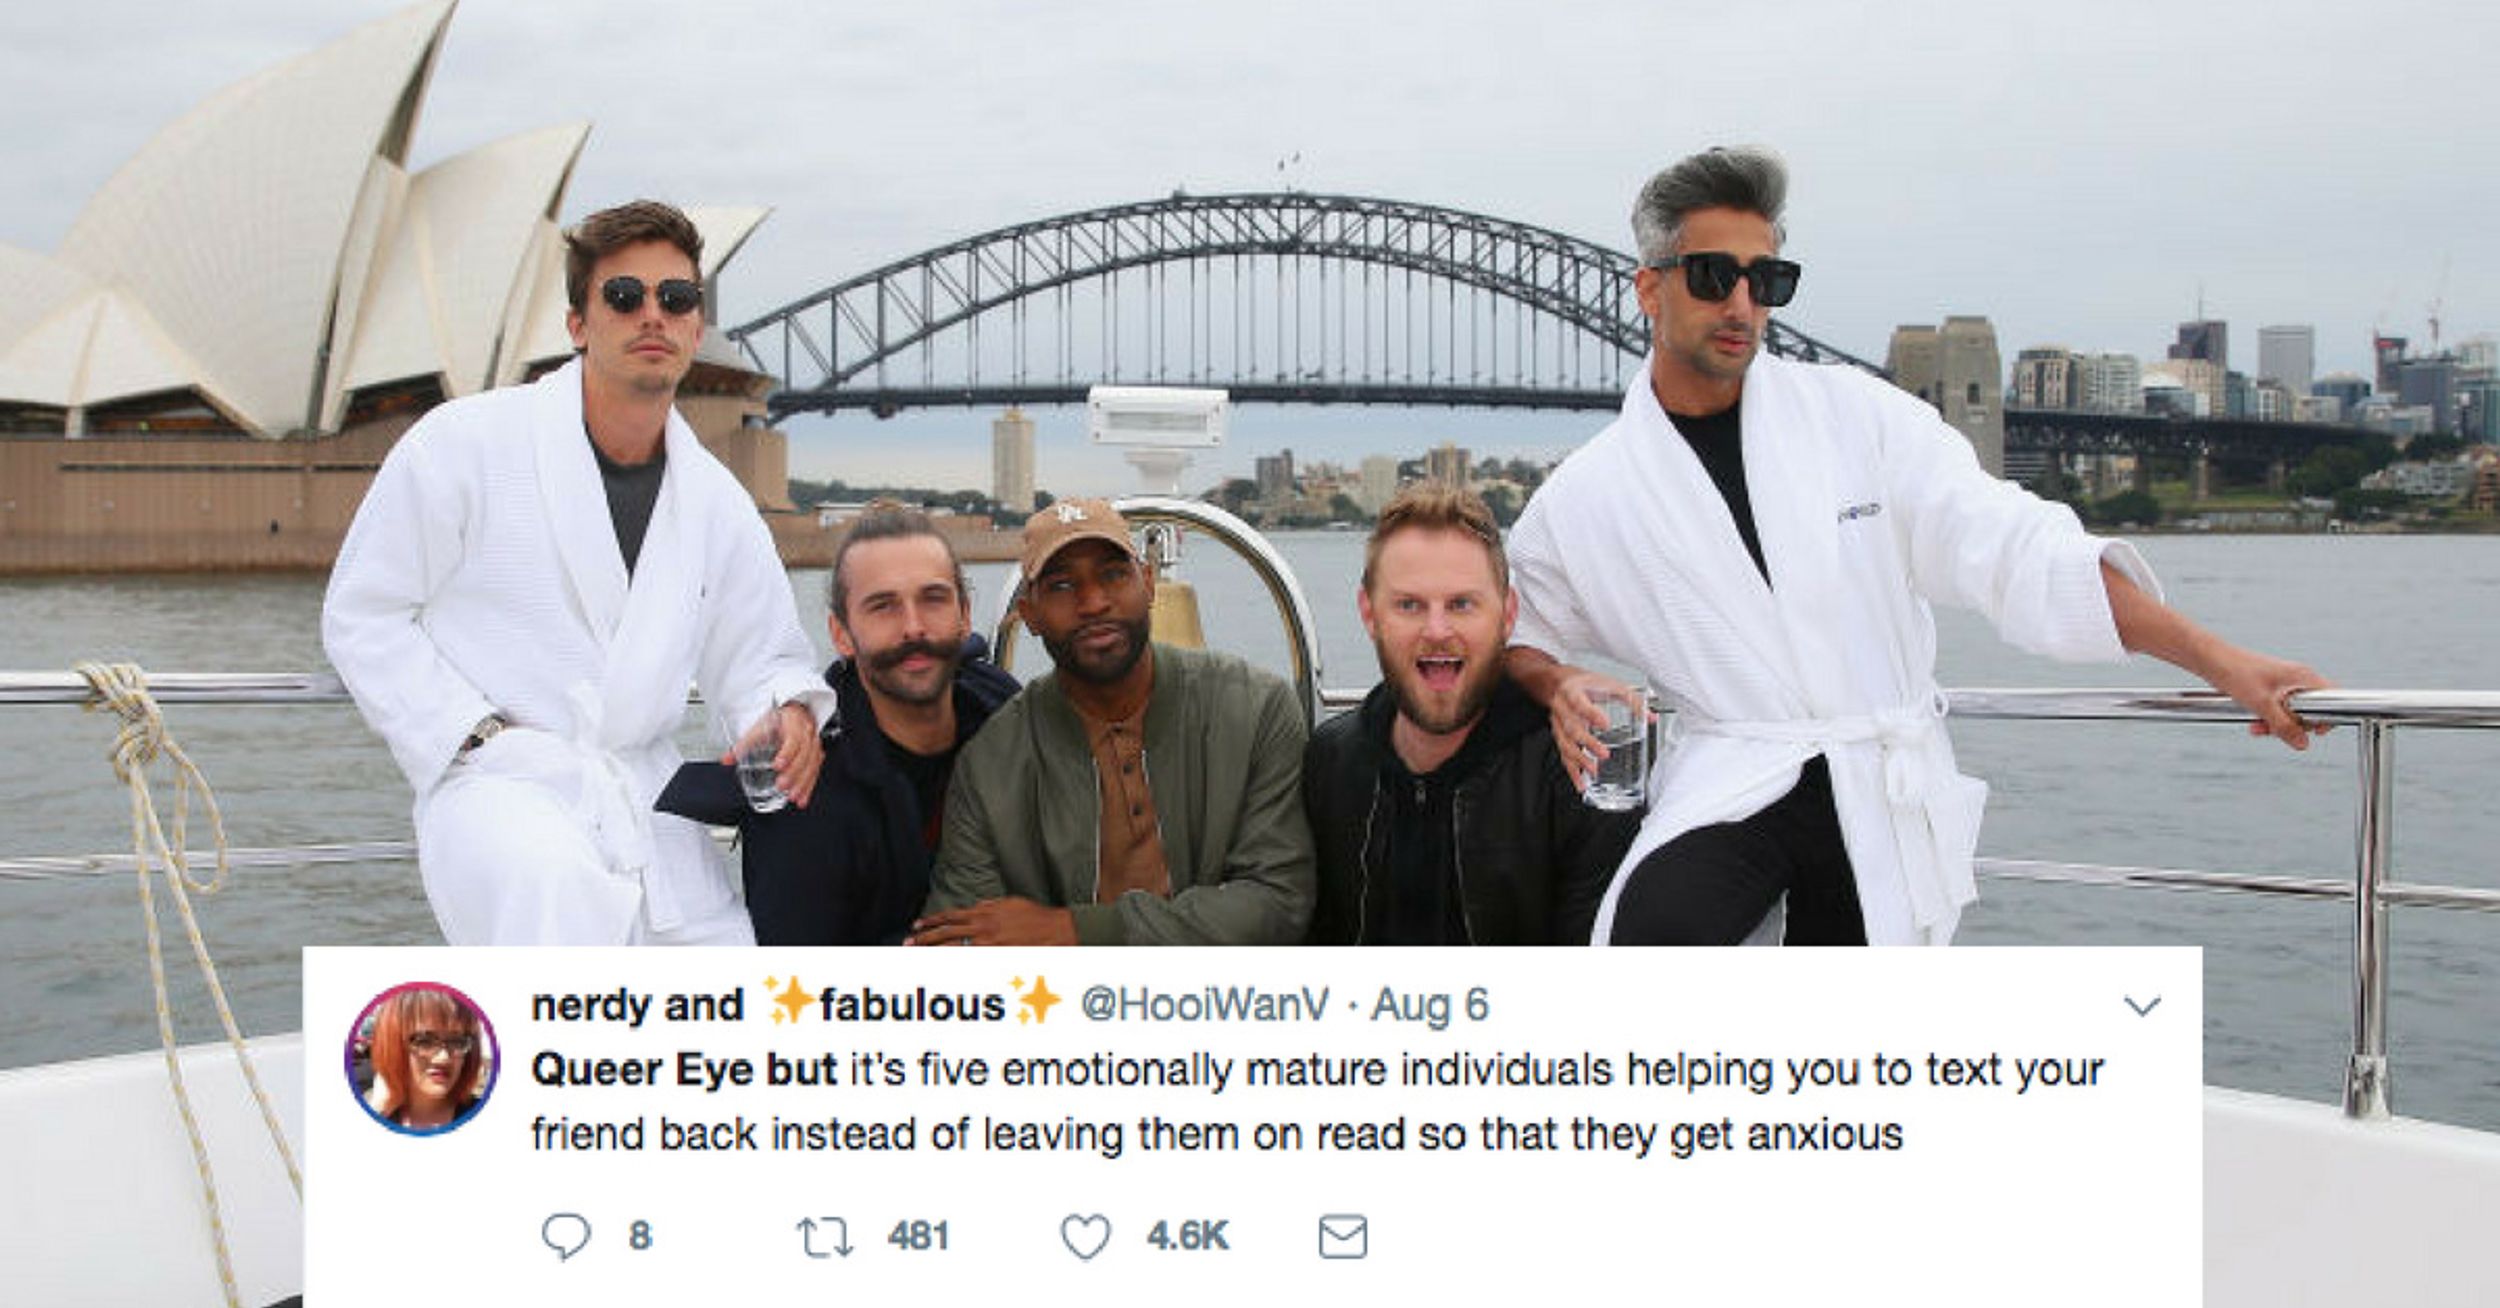 The 'Queer Eye But' Meme Imagines The Alternate Versions Of The Show We've All Been Waiting For 😂